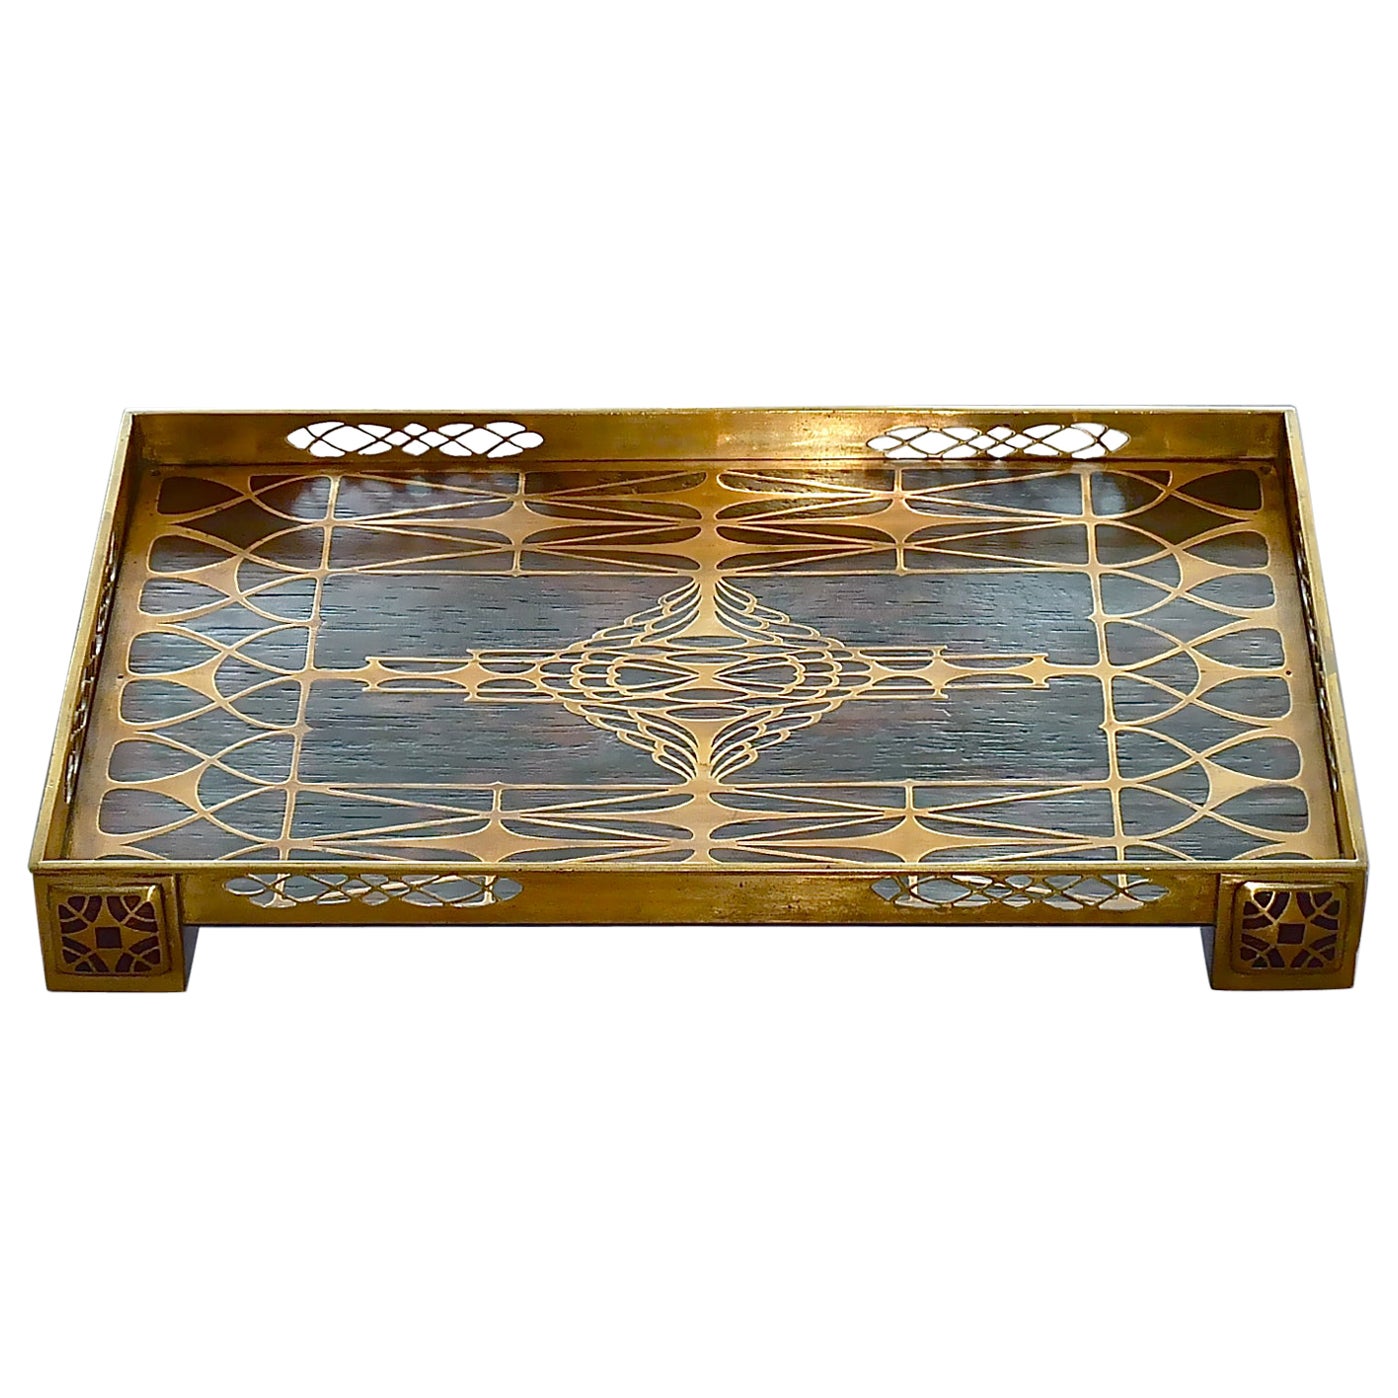 Large Tray and Pen Holder Pot Erhard & Sohne Wood Inlay Brass Art Nouveau, 1900